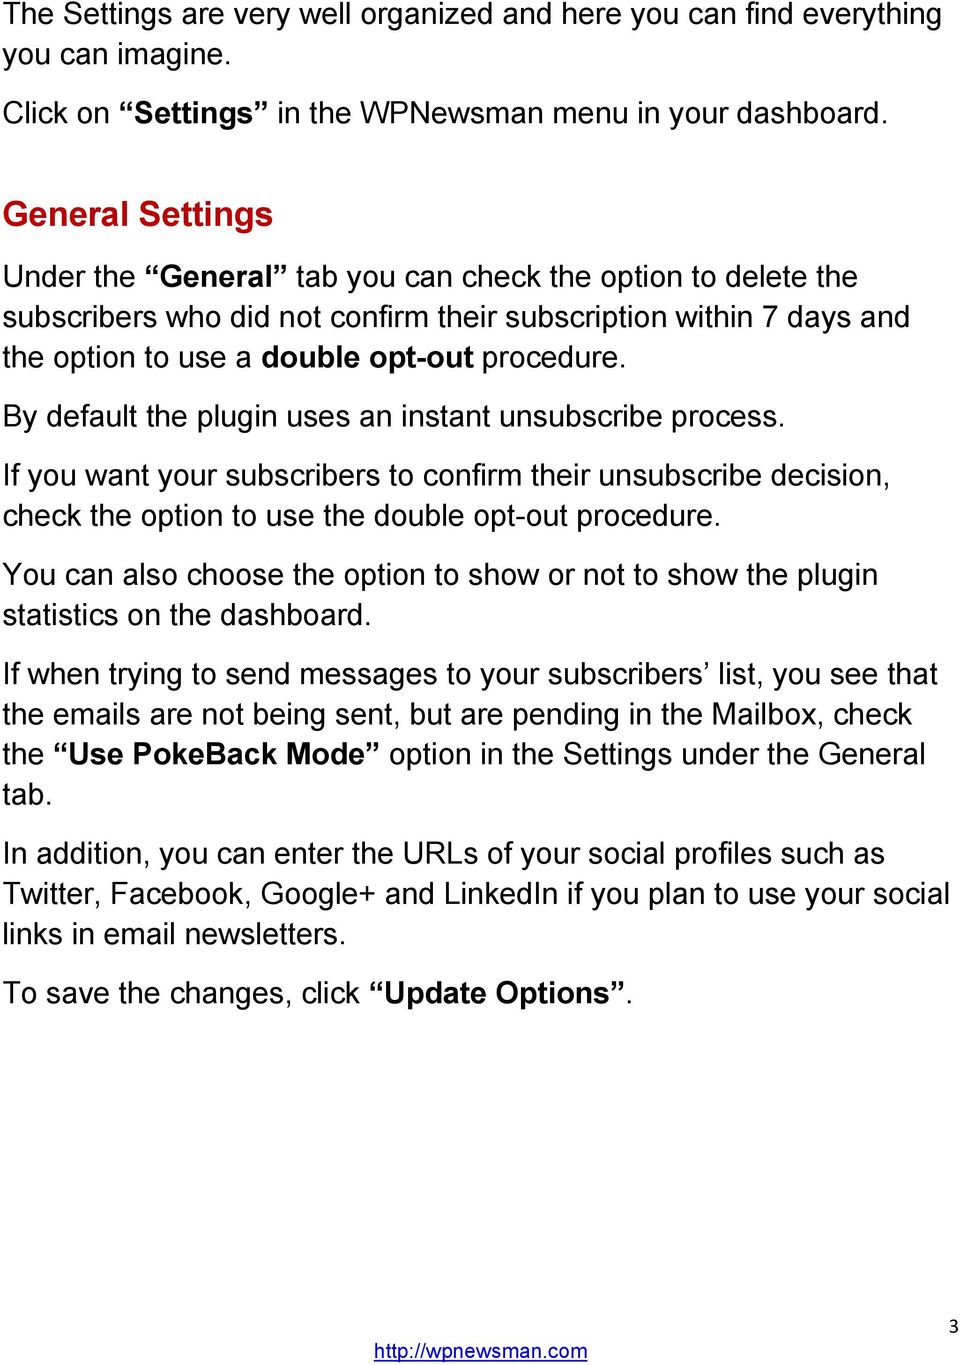 By default the plugin uses an instant unsubscribe process. If you want your subscribers to confirm their unsubscribe decision, check the option to use the double opt-out procedure.